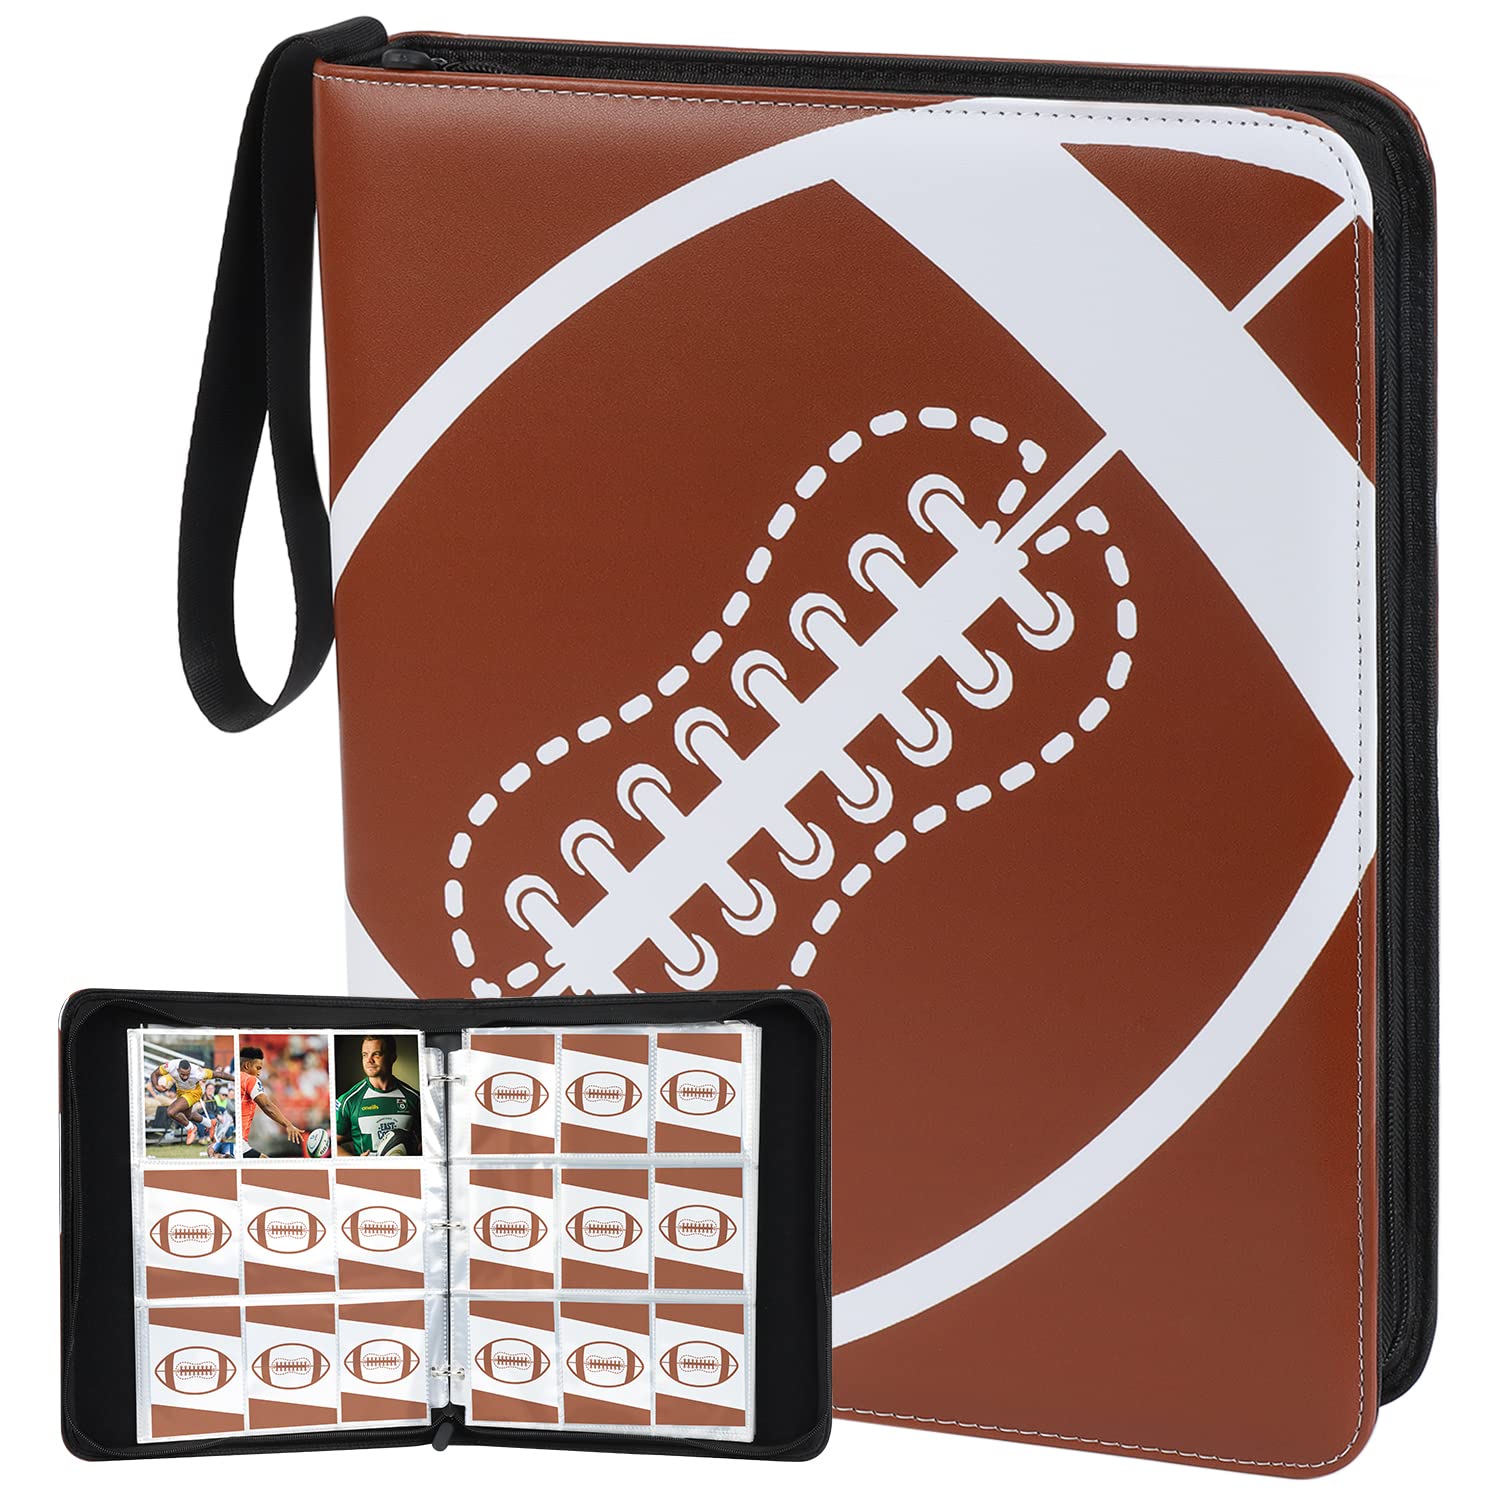 FunreemaG 900 cards Football card Binder Sleeves for Trading cards,Football 3 Ring card Binder Hold Up to 900 cards,Trading card collector